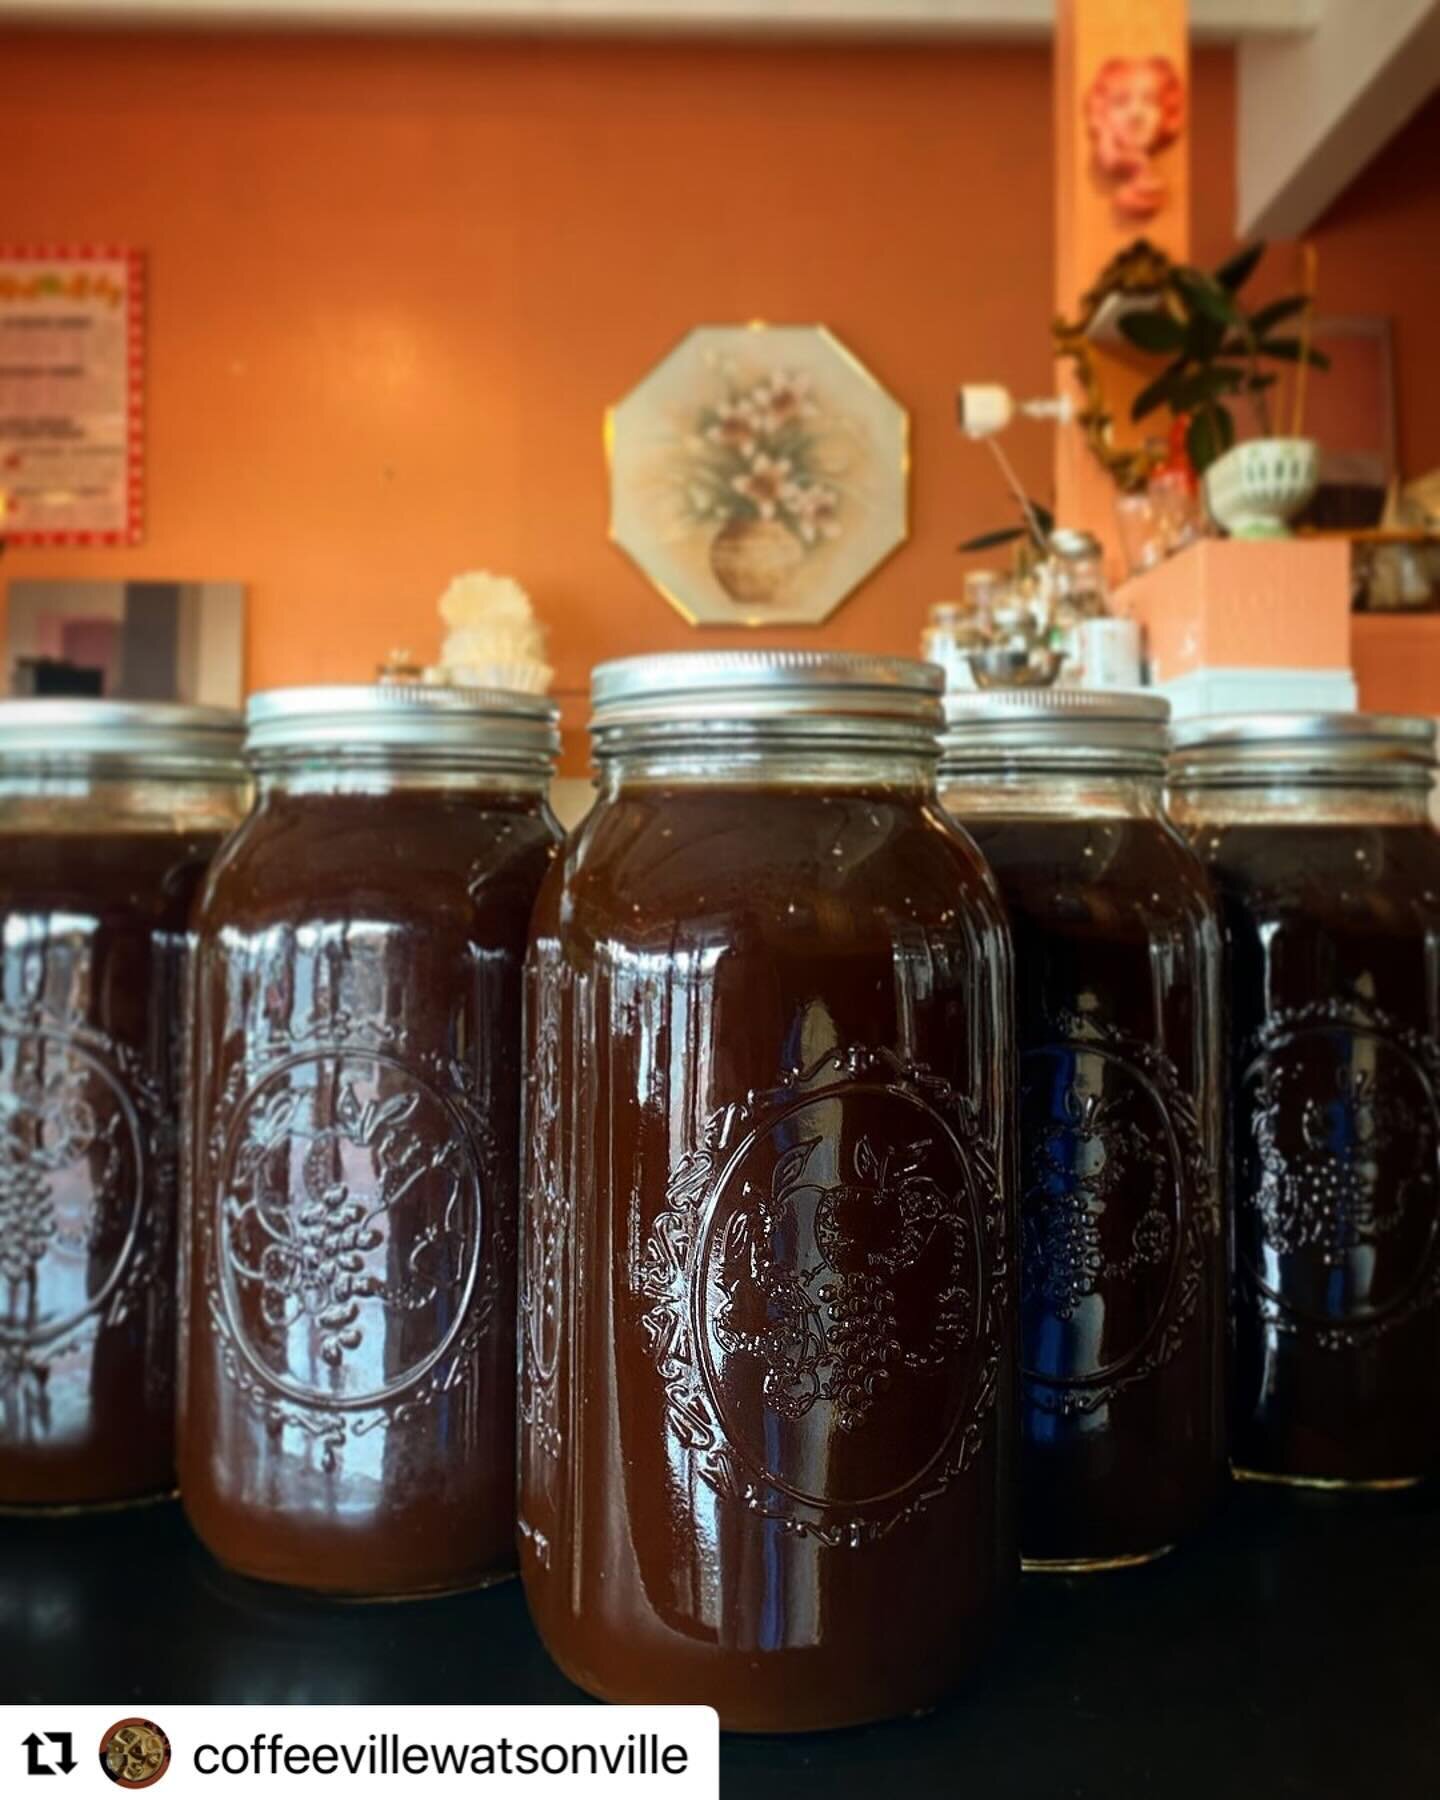 #Repost @coffeevillewatsonville 
・・・
&hellip; enough cold brew for the week &hellip;😋 cold brew is a general term: there&rsquo;s a number of ways to prep it, resulting in anything from a light, tea-like iced coffee to a flavor packed latte using a c